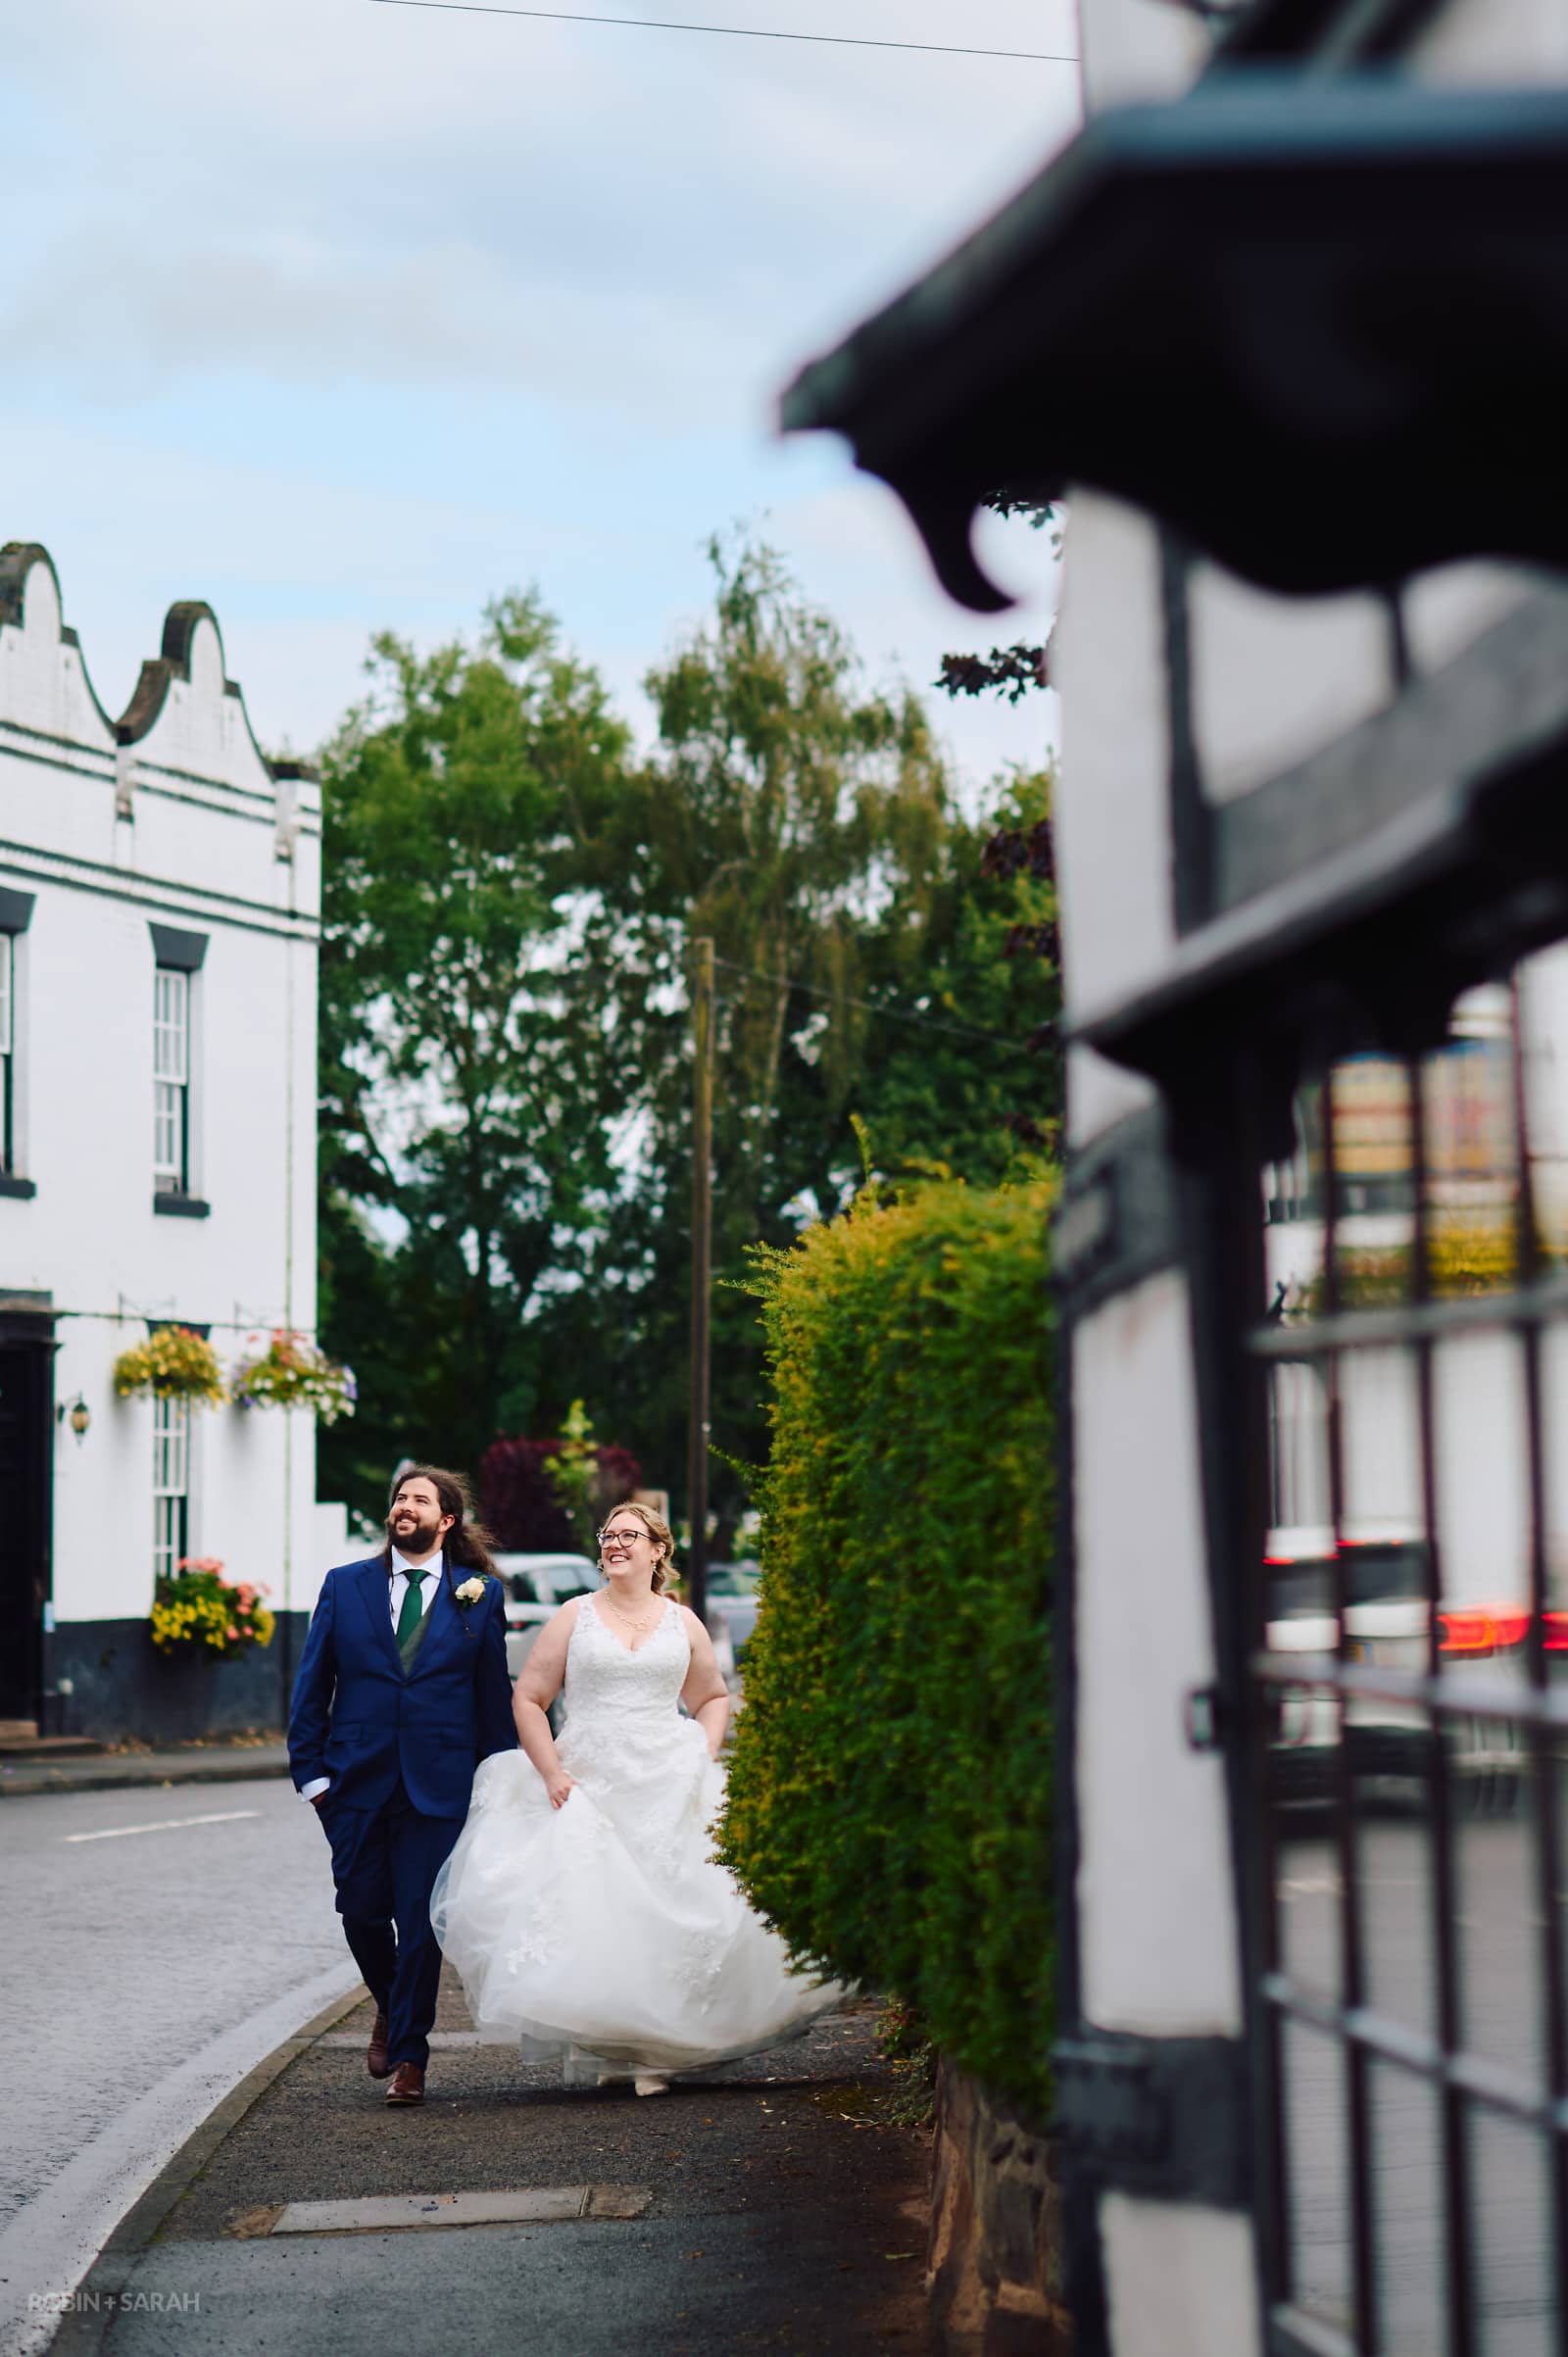 Bride and groom walk down high street in Ombersley with The Crown & Sandys pub in background